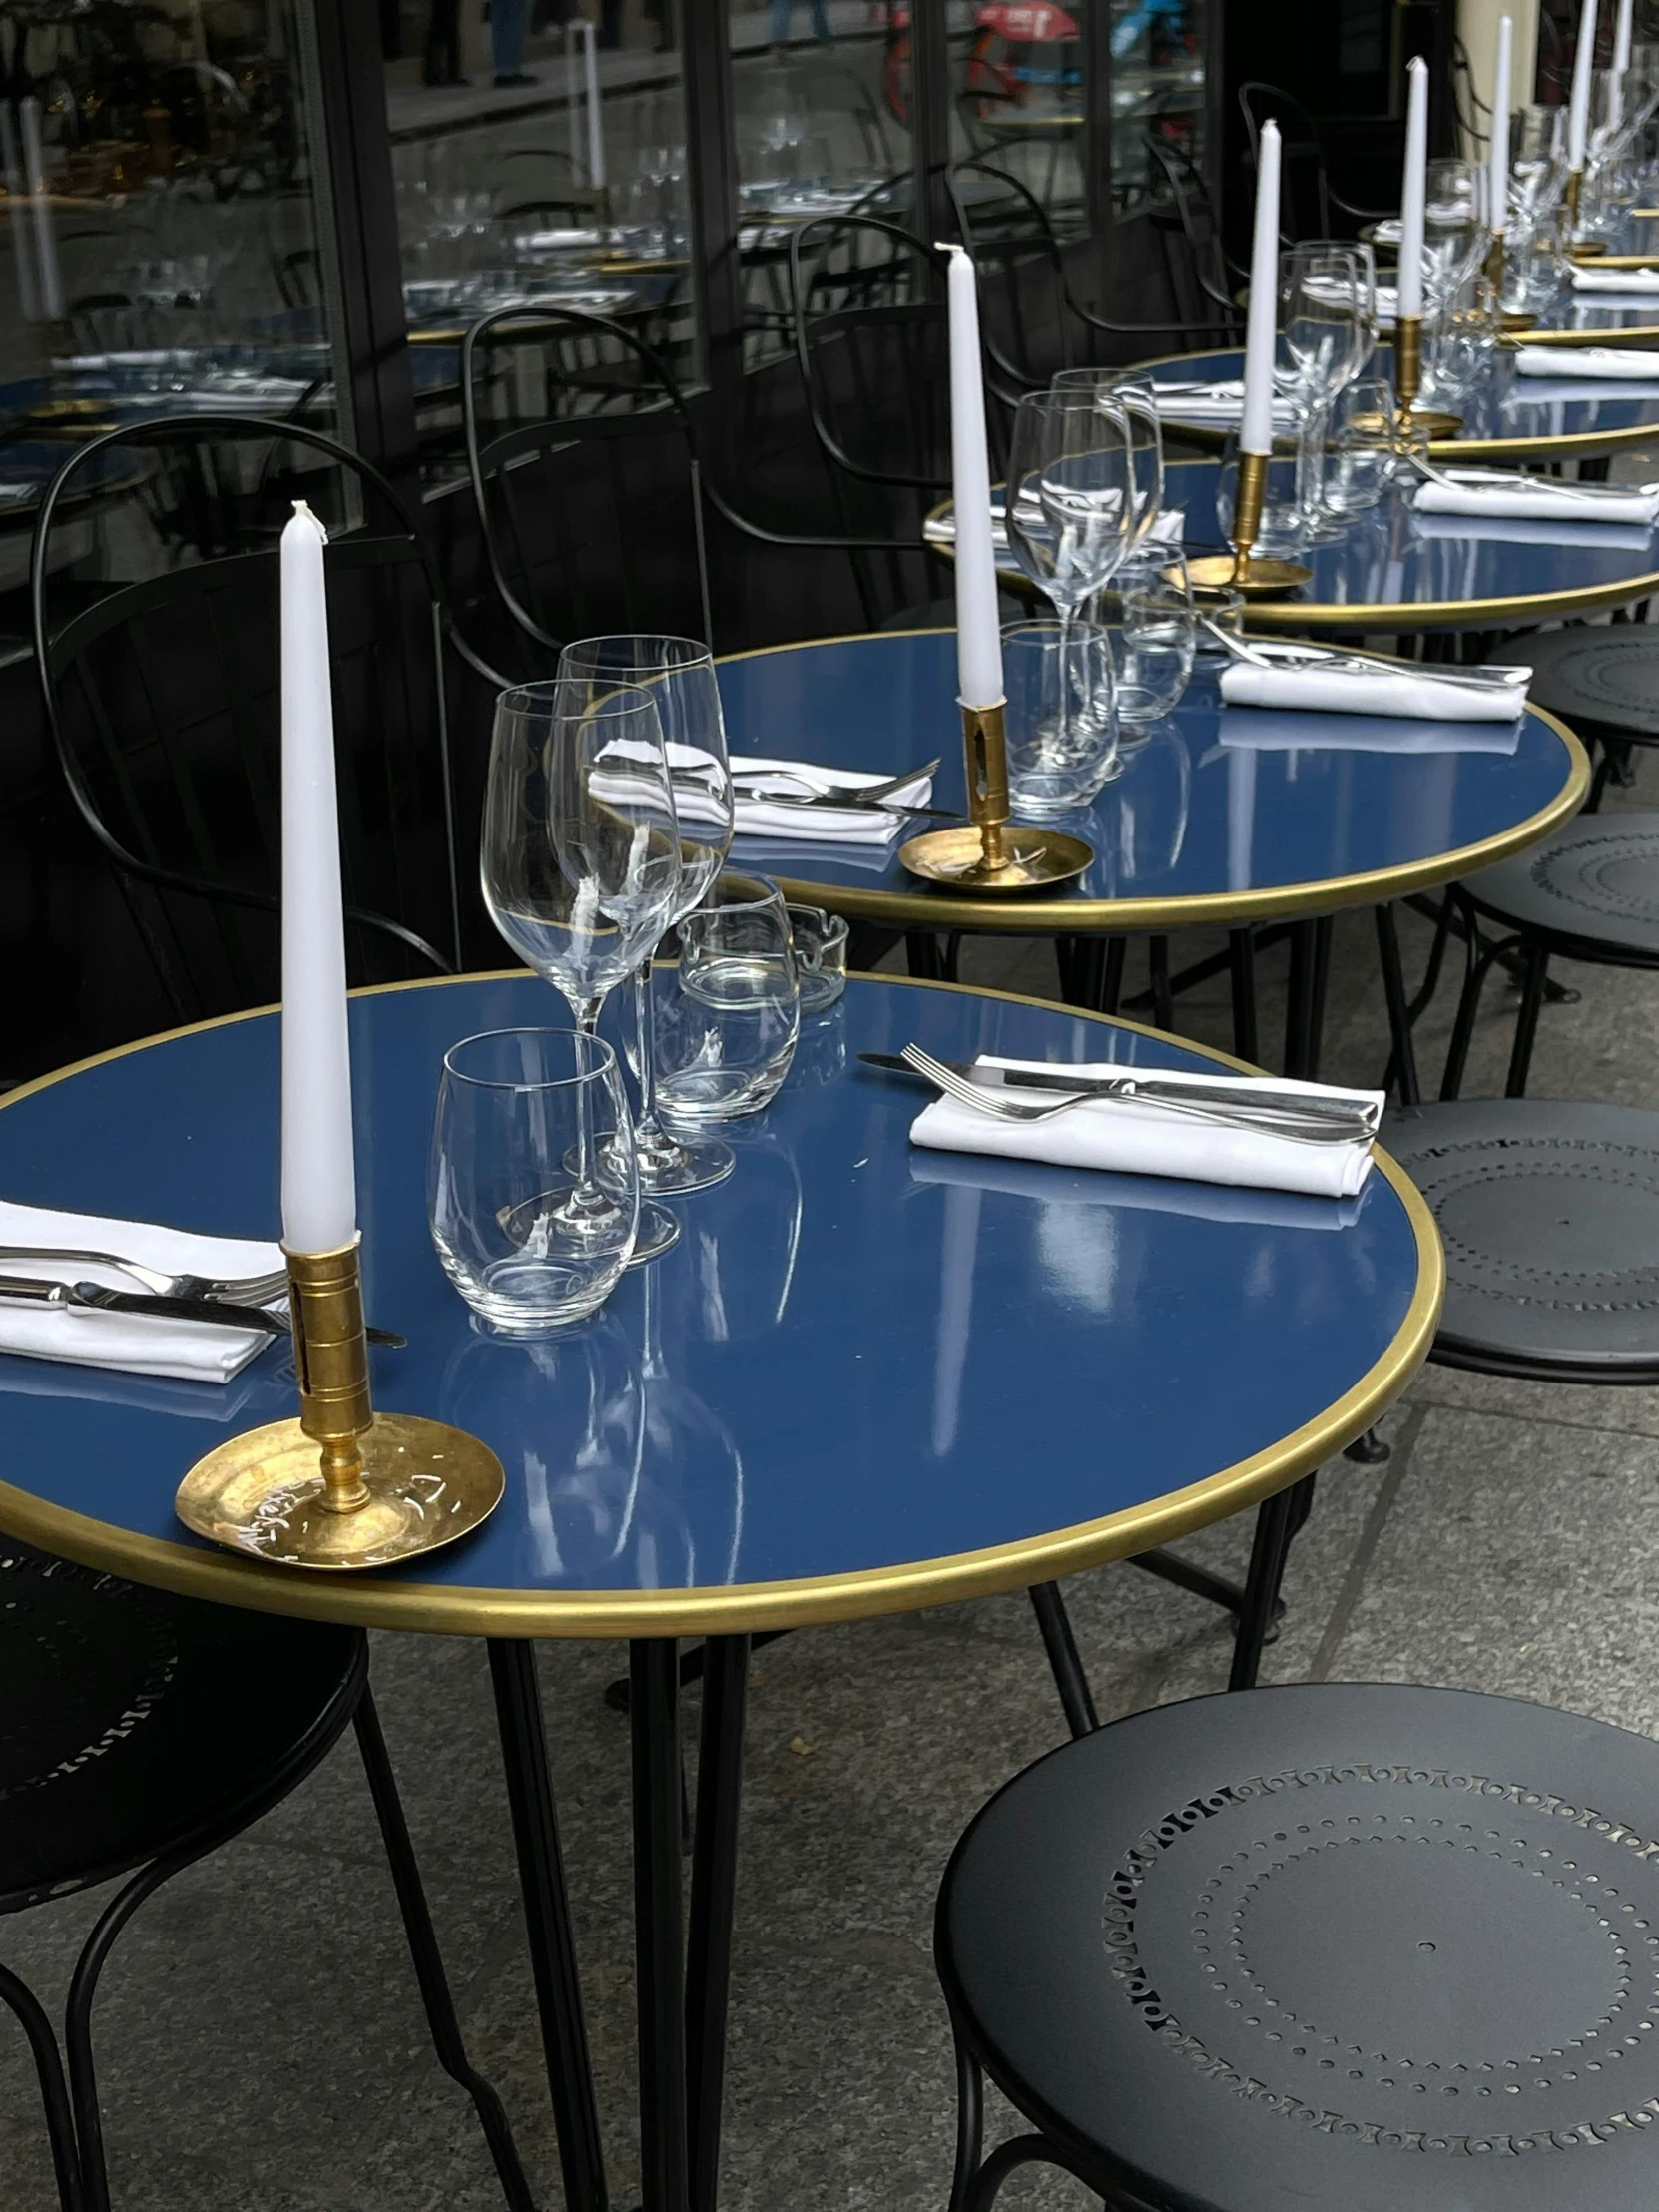 a line up of tables with wine glasses and candles